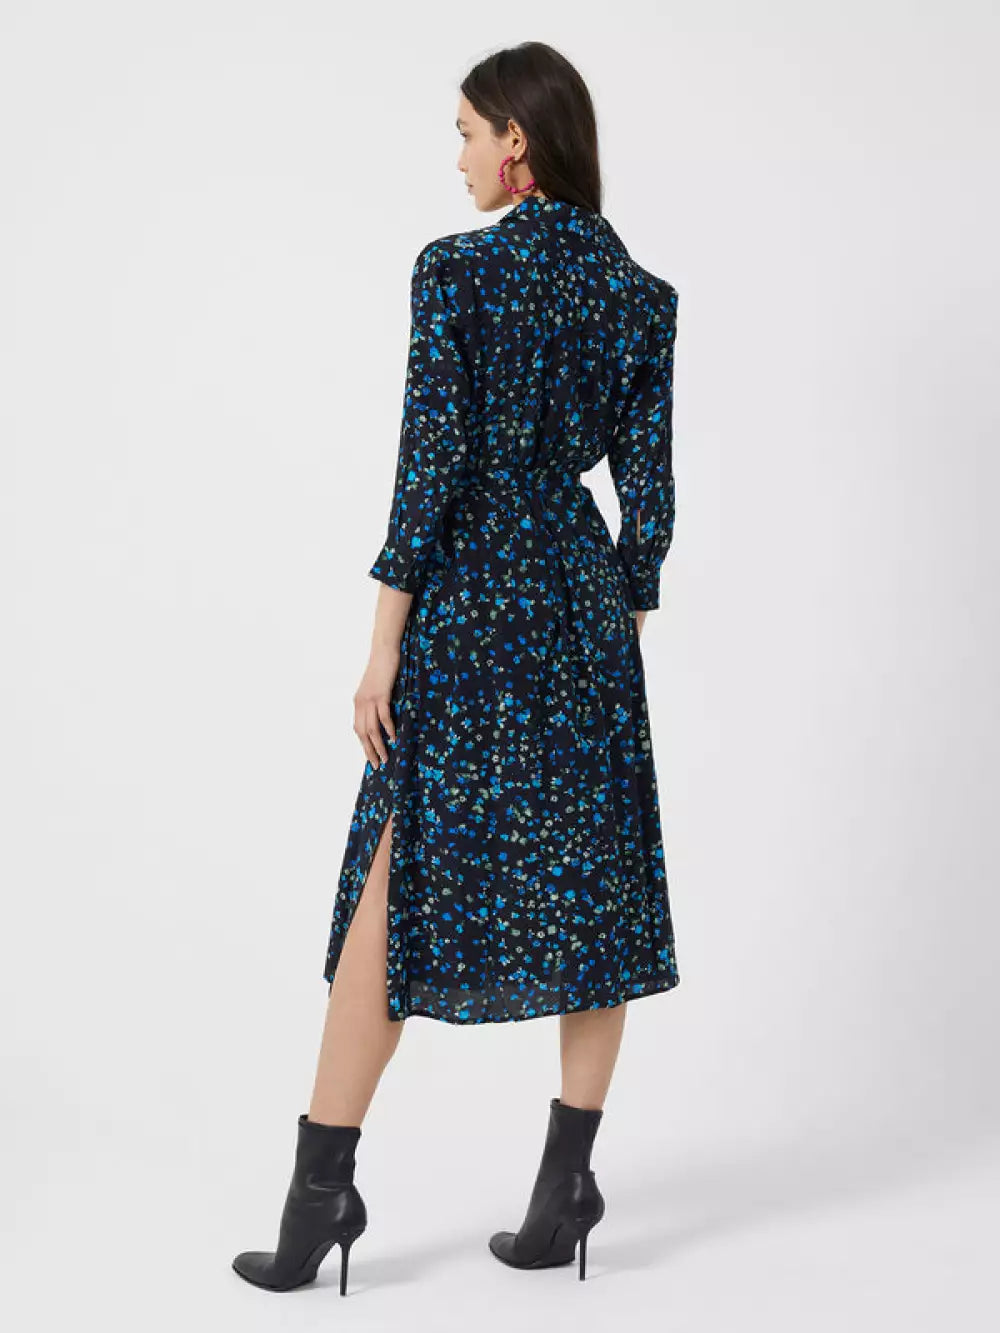 French Connection Ferna Bella Shirt Dress product image